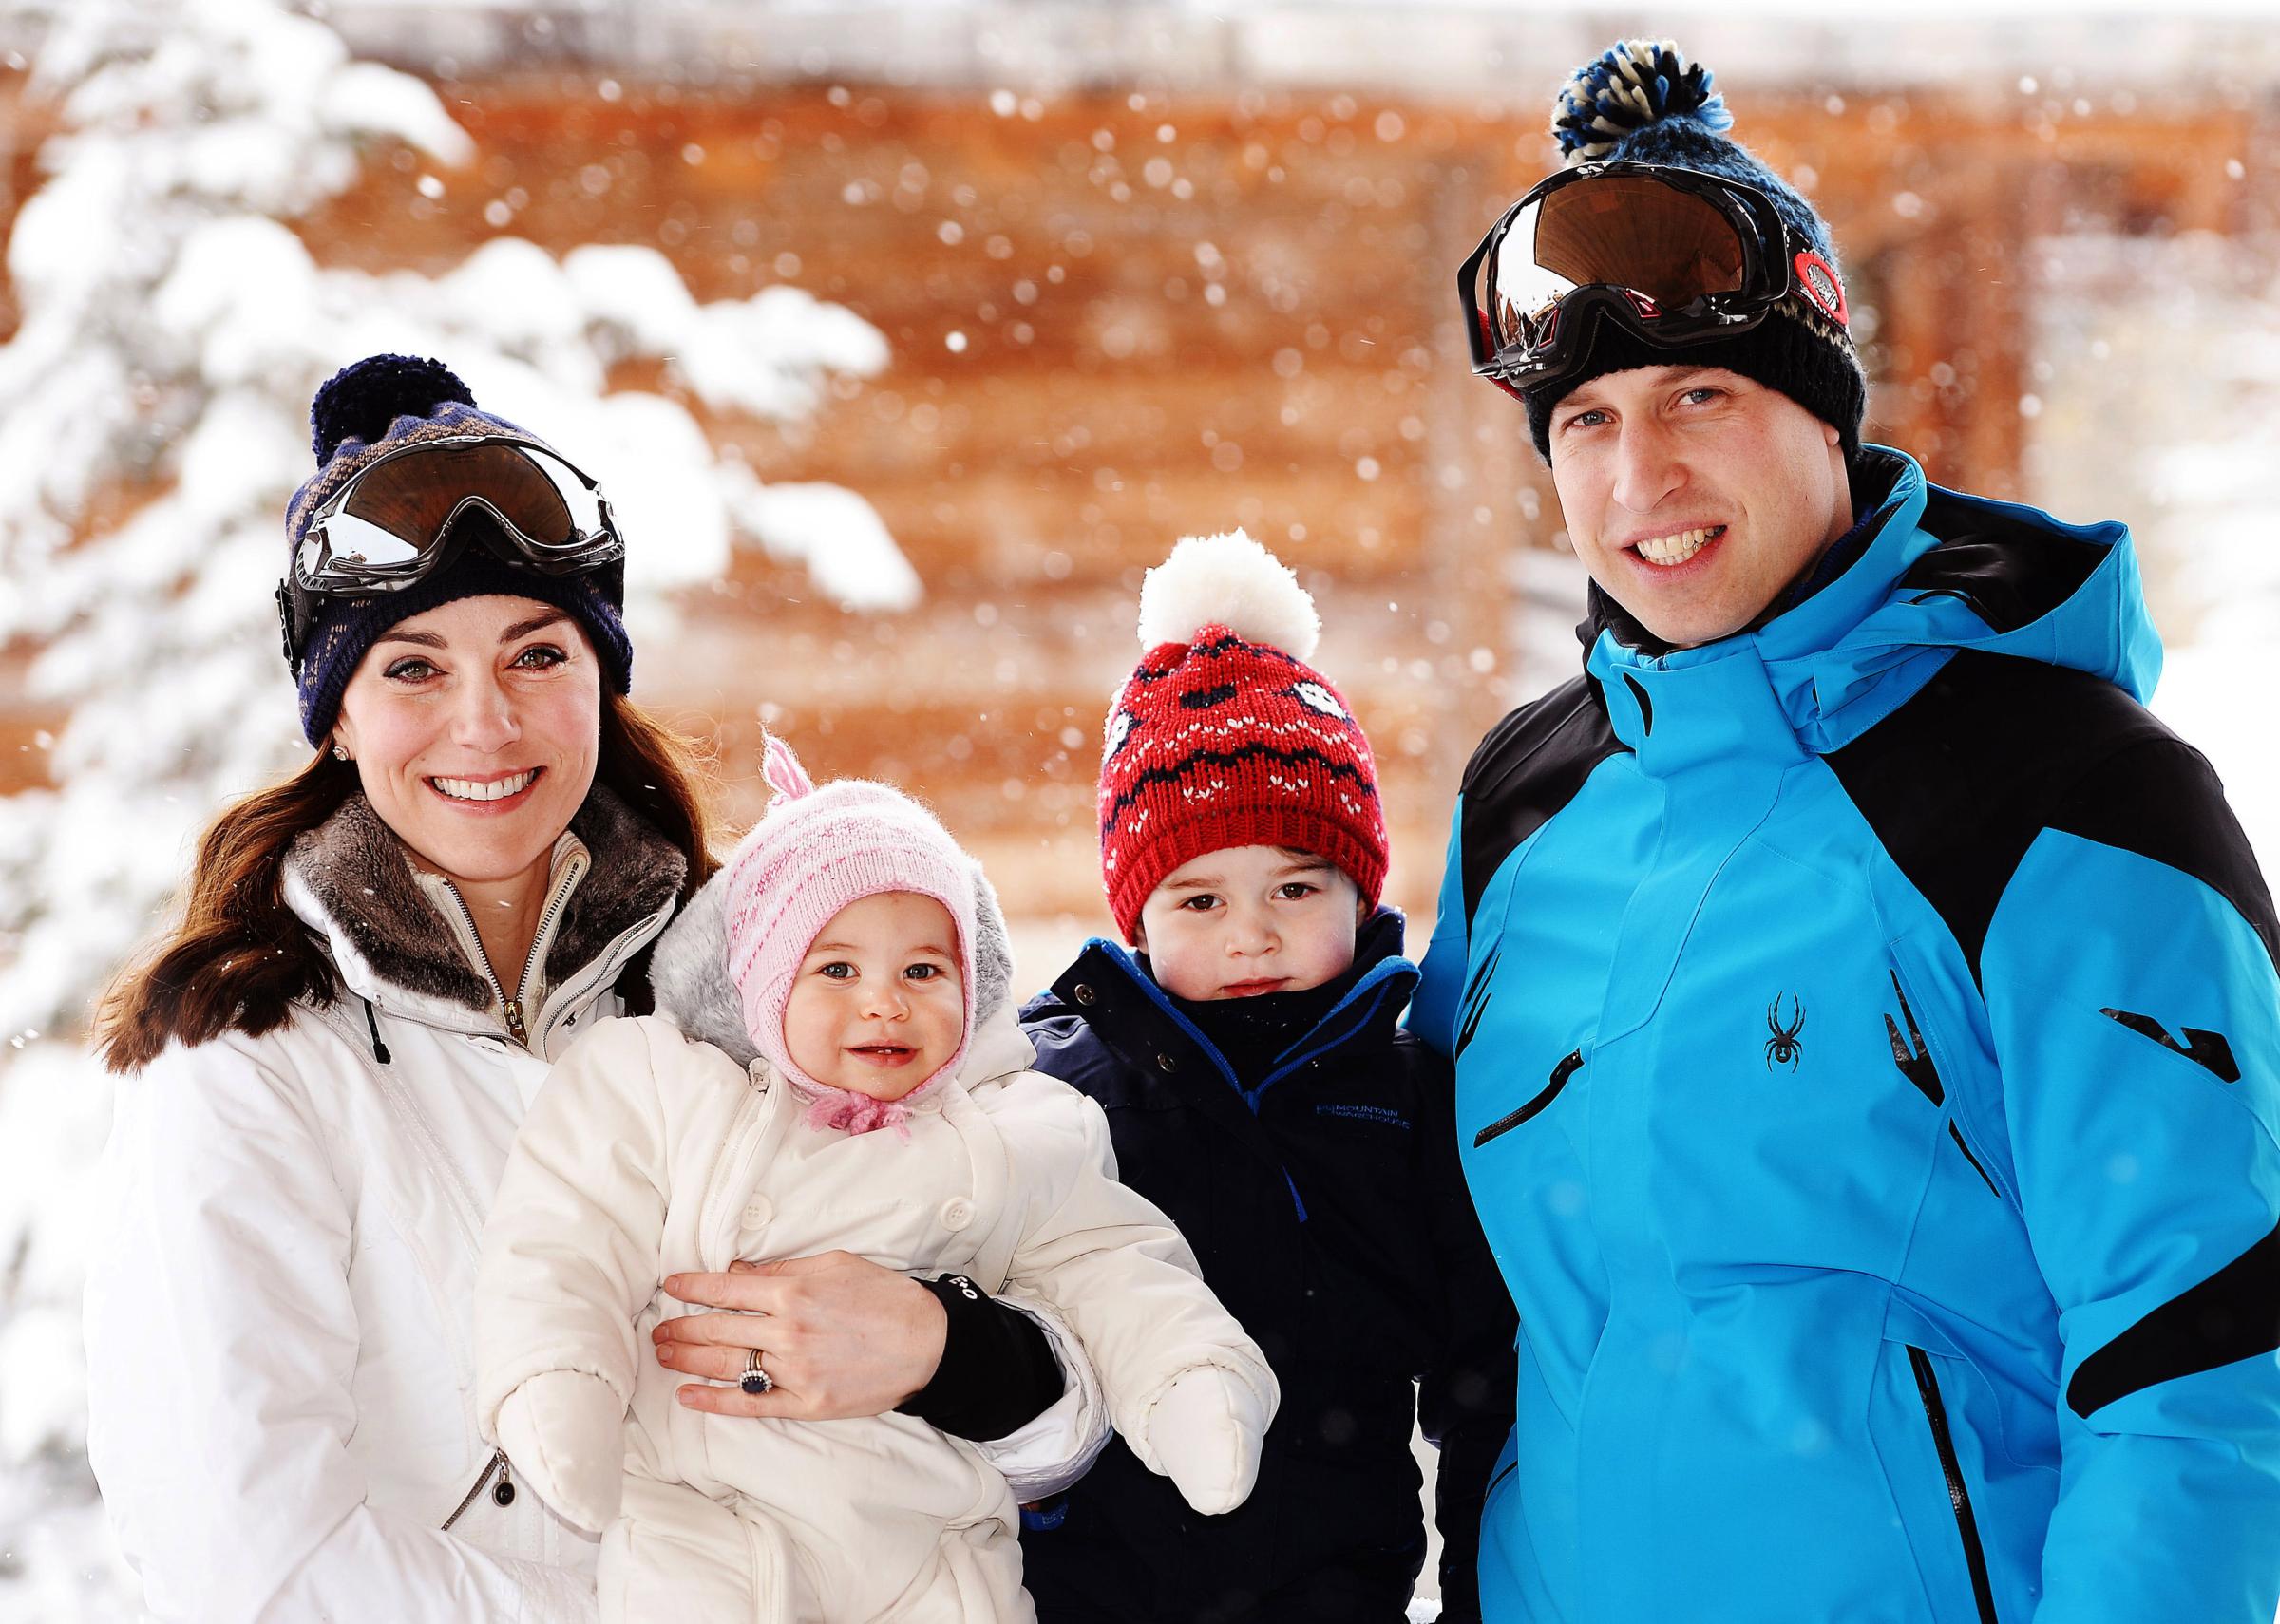 Catherine, Duchess of Cambridge, and Prince William, Duke of Cambridge, with their children Princess Charlotte and Prince George, enjoy a short private skiing break in the French Alps on March 3, 2016.